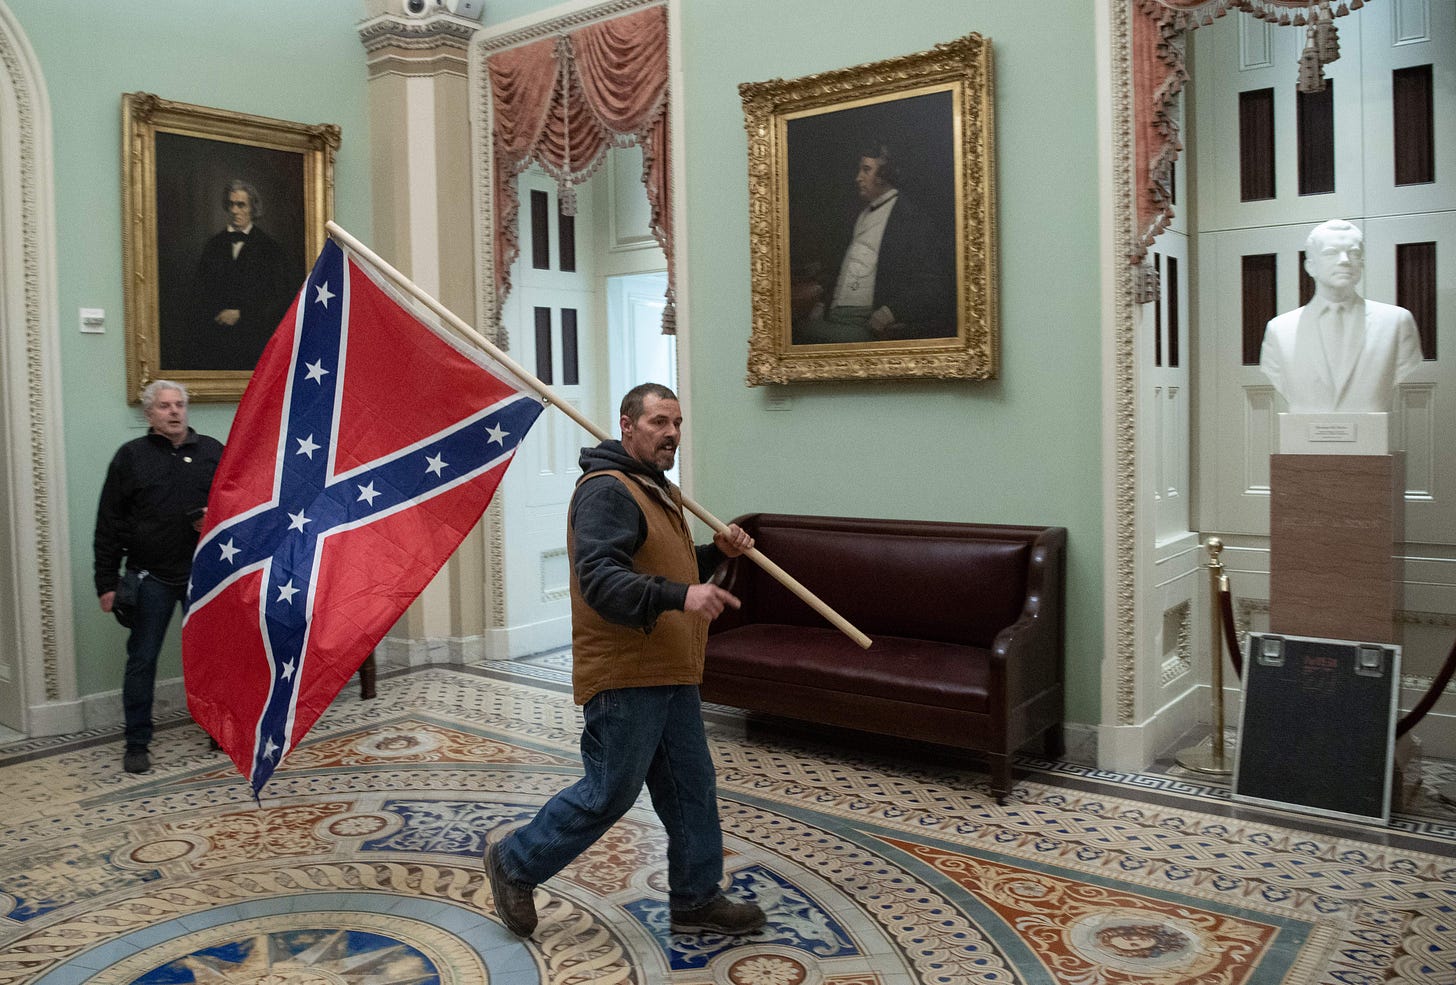 Man who carried Confederate flag to Capitol during riot indicted